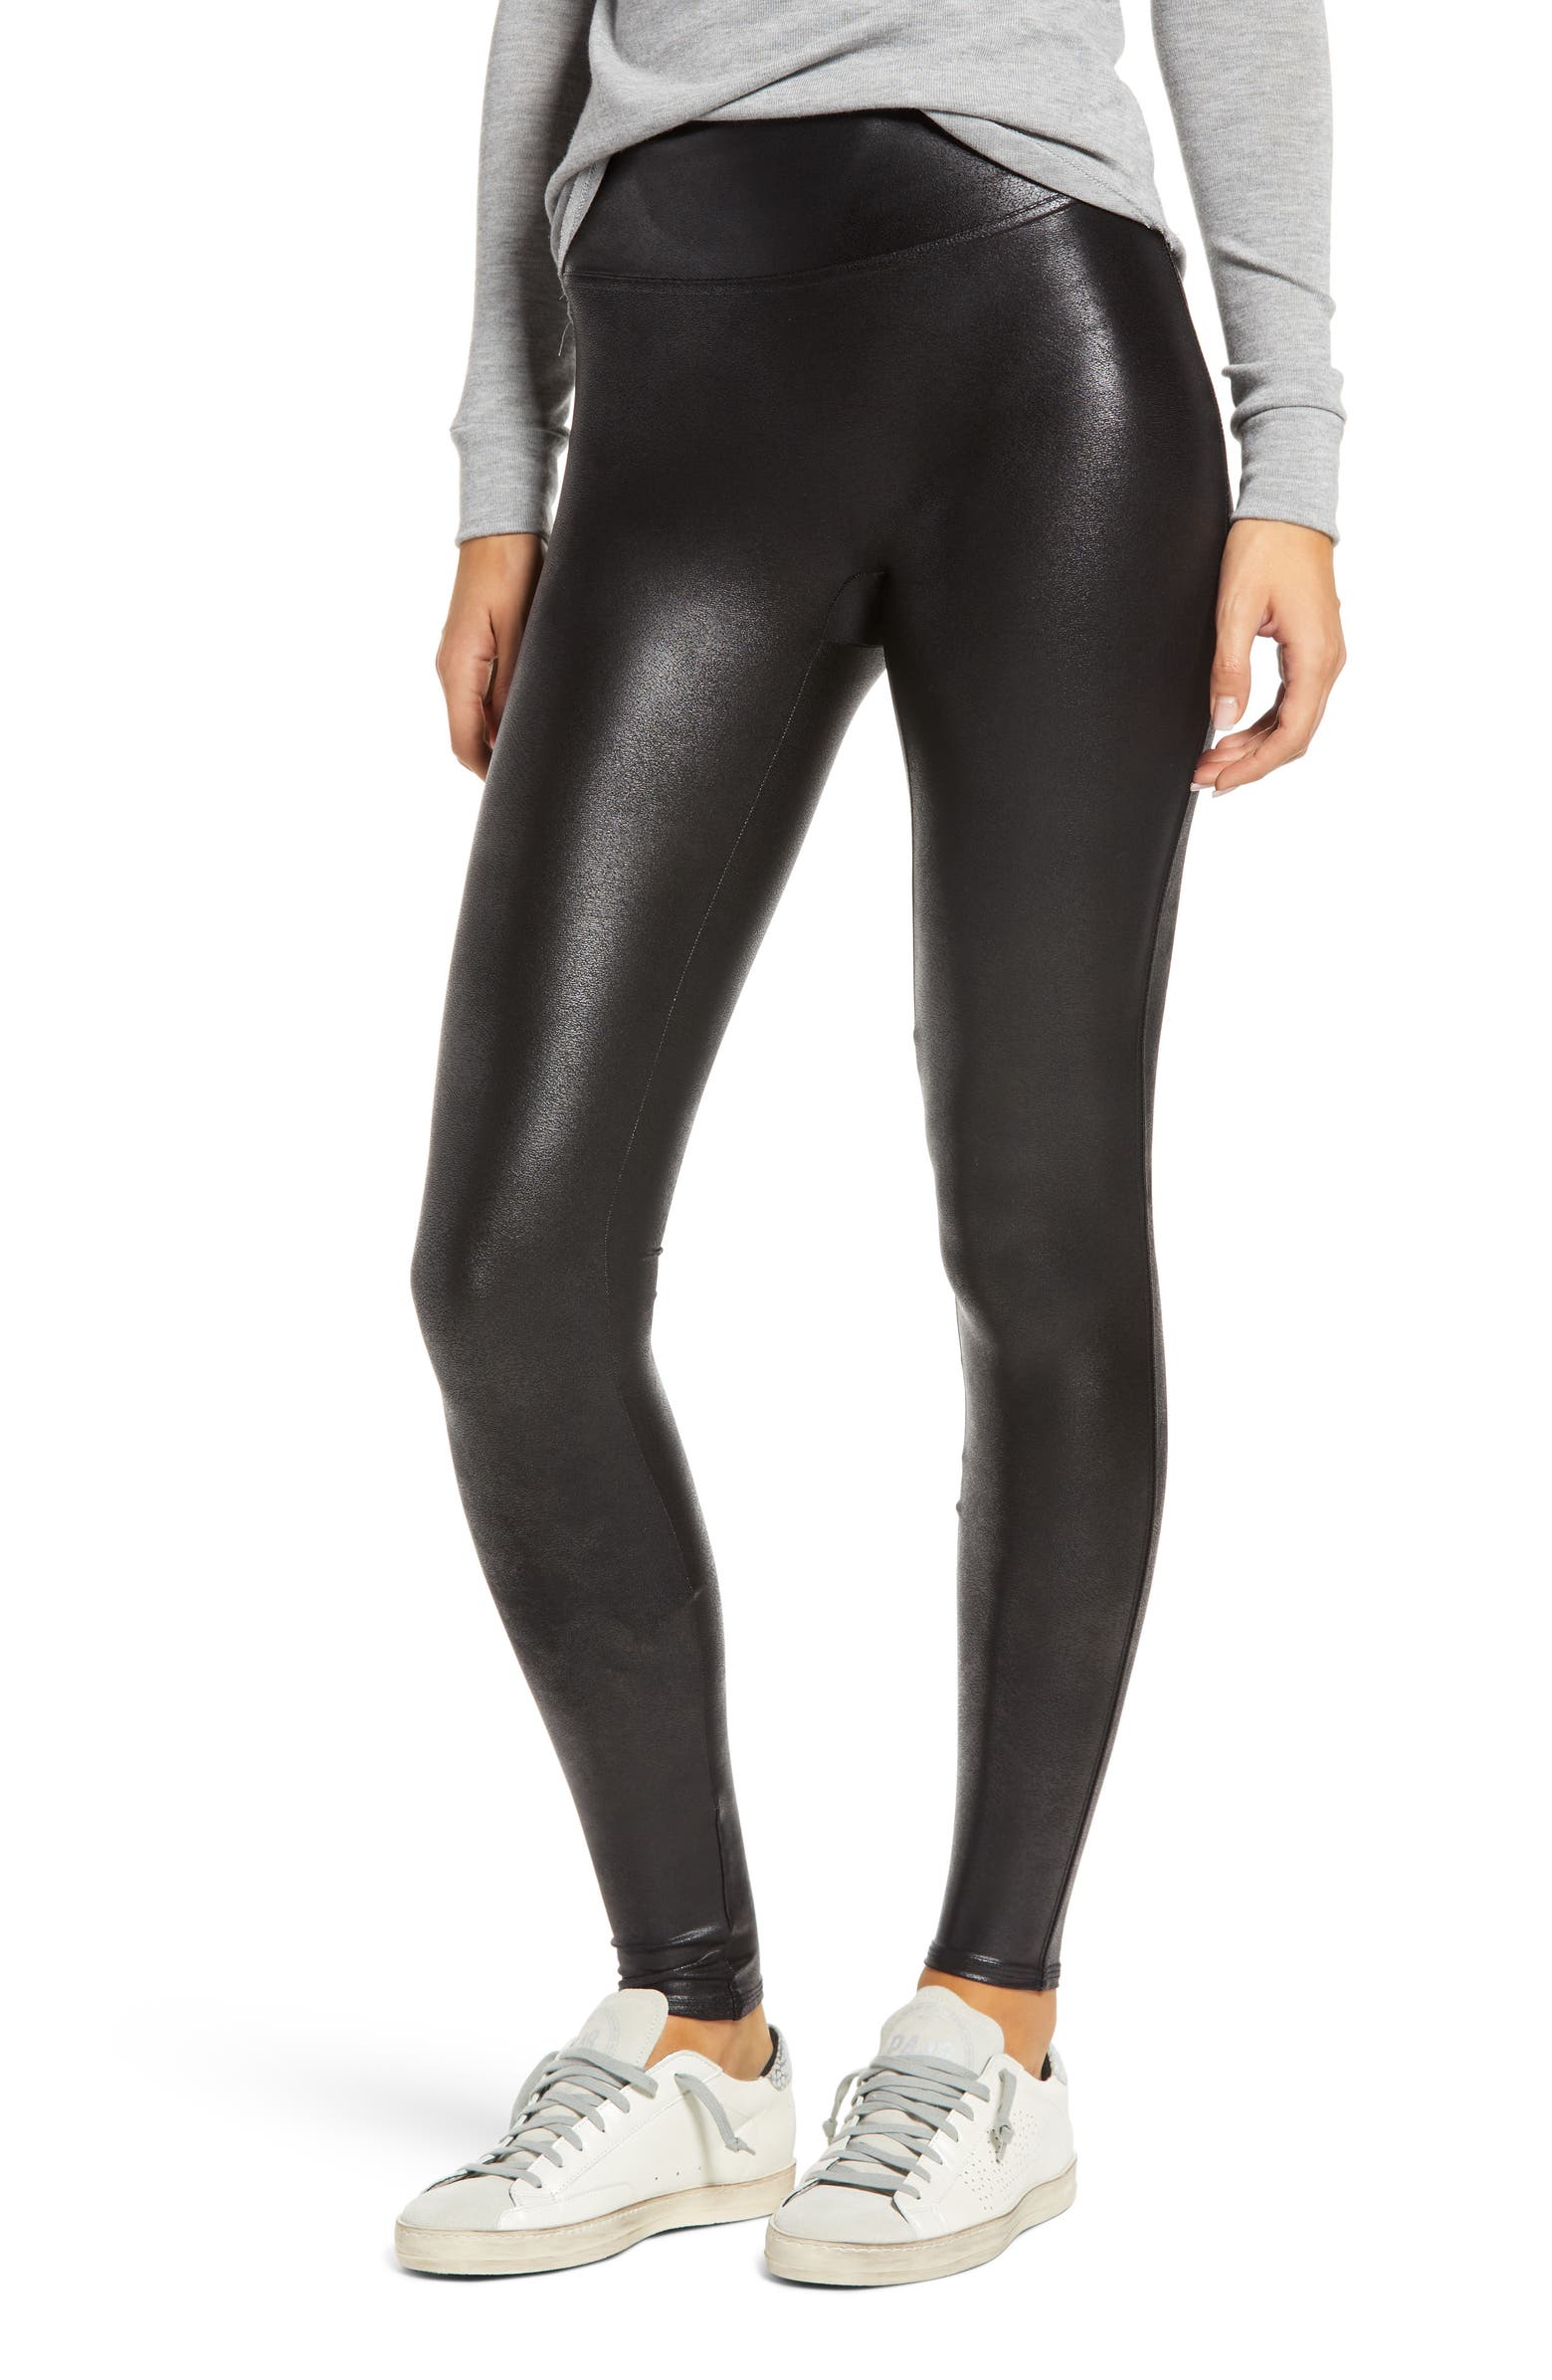 Spanx Leather Leggings Review  International Society of Precision